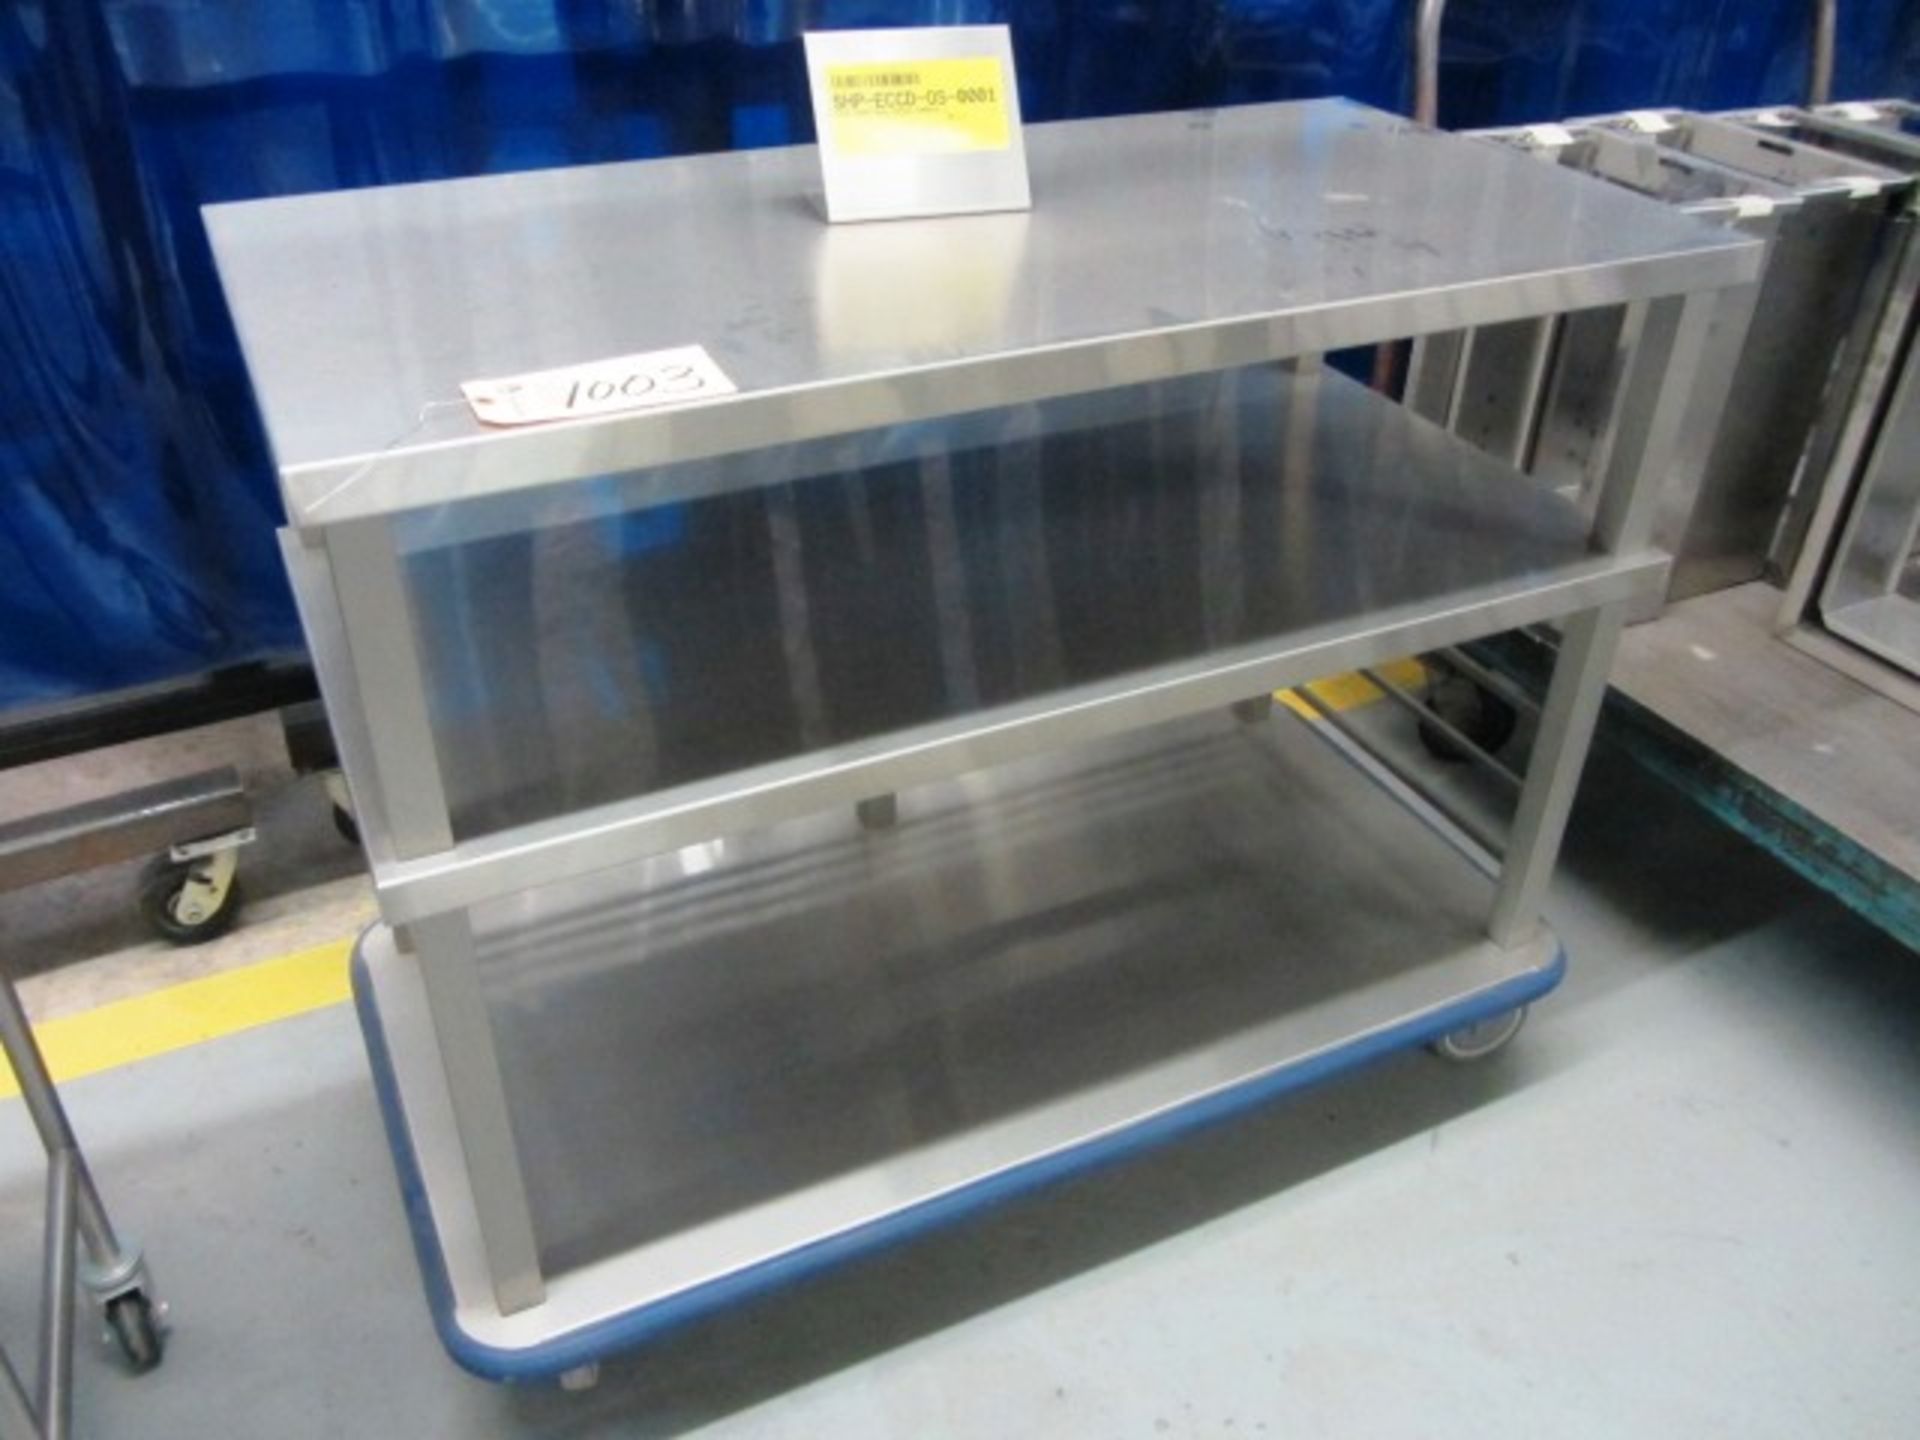 Stainless Steel Portable Cart, ECCD-OS-0001